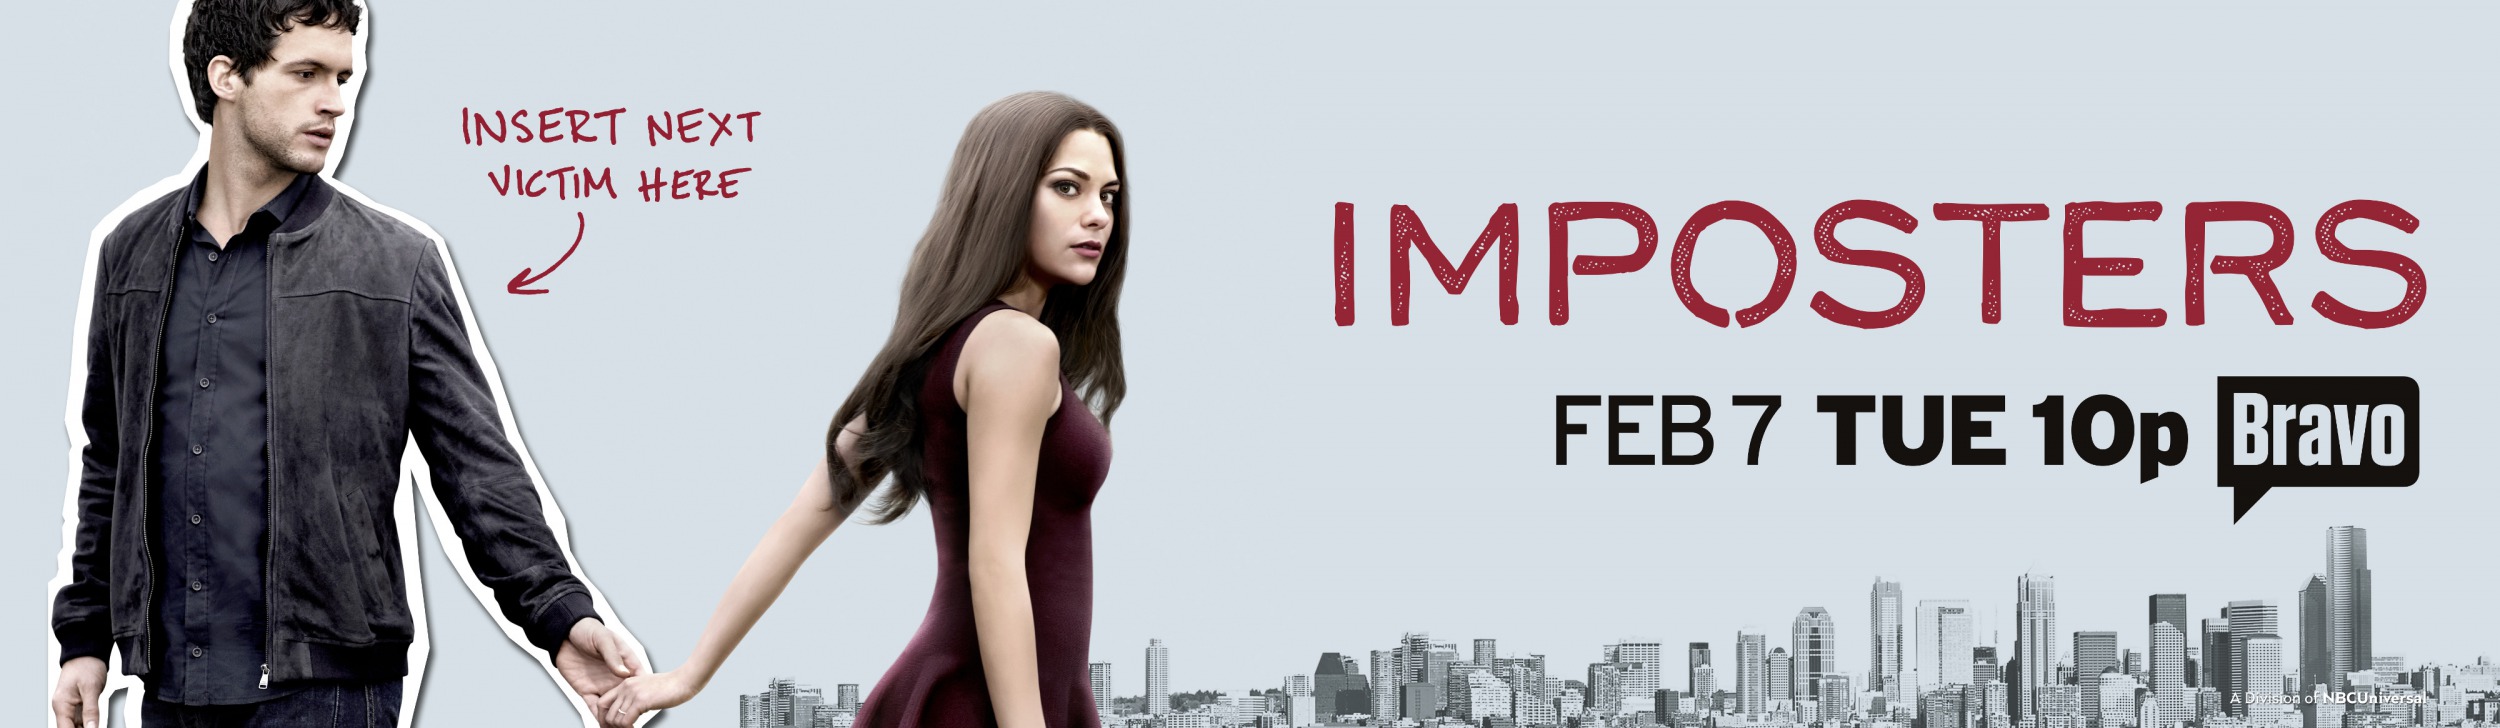 Mega Sized TV Poster Image for Imposters (#2 of 3)